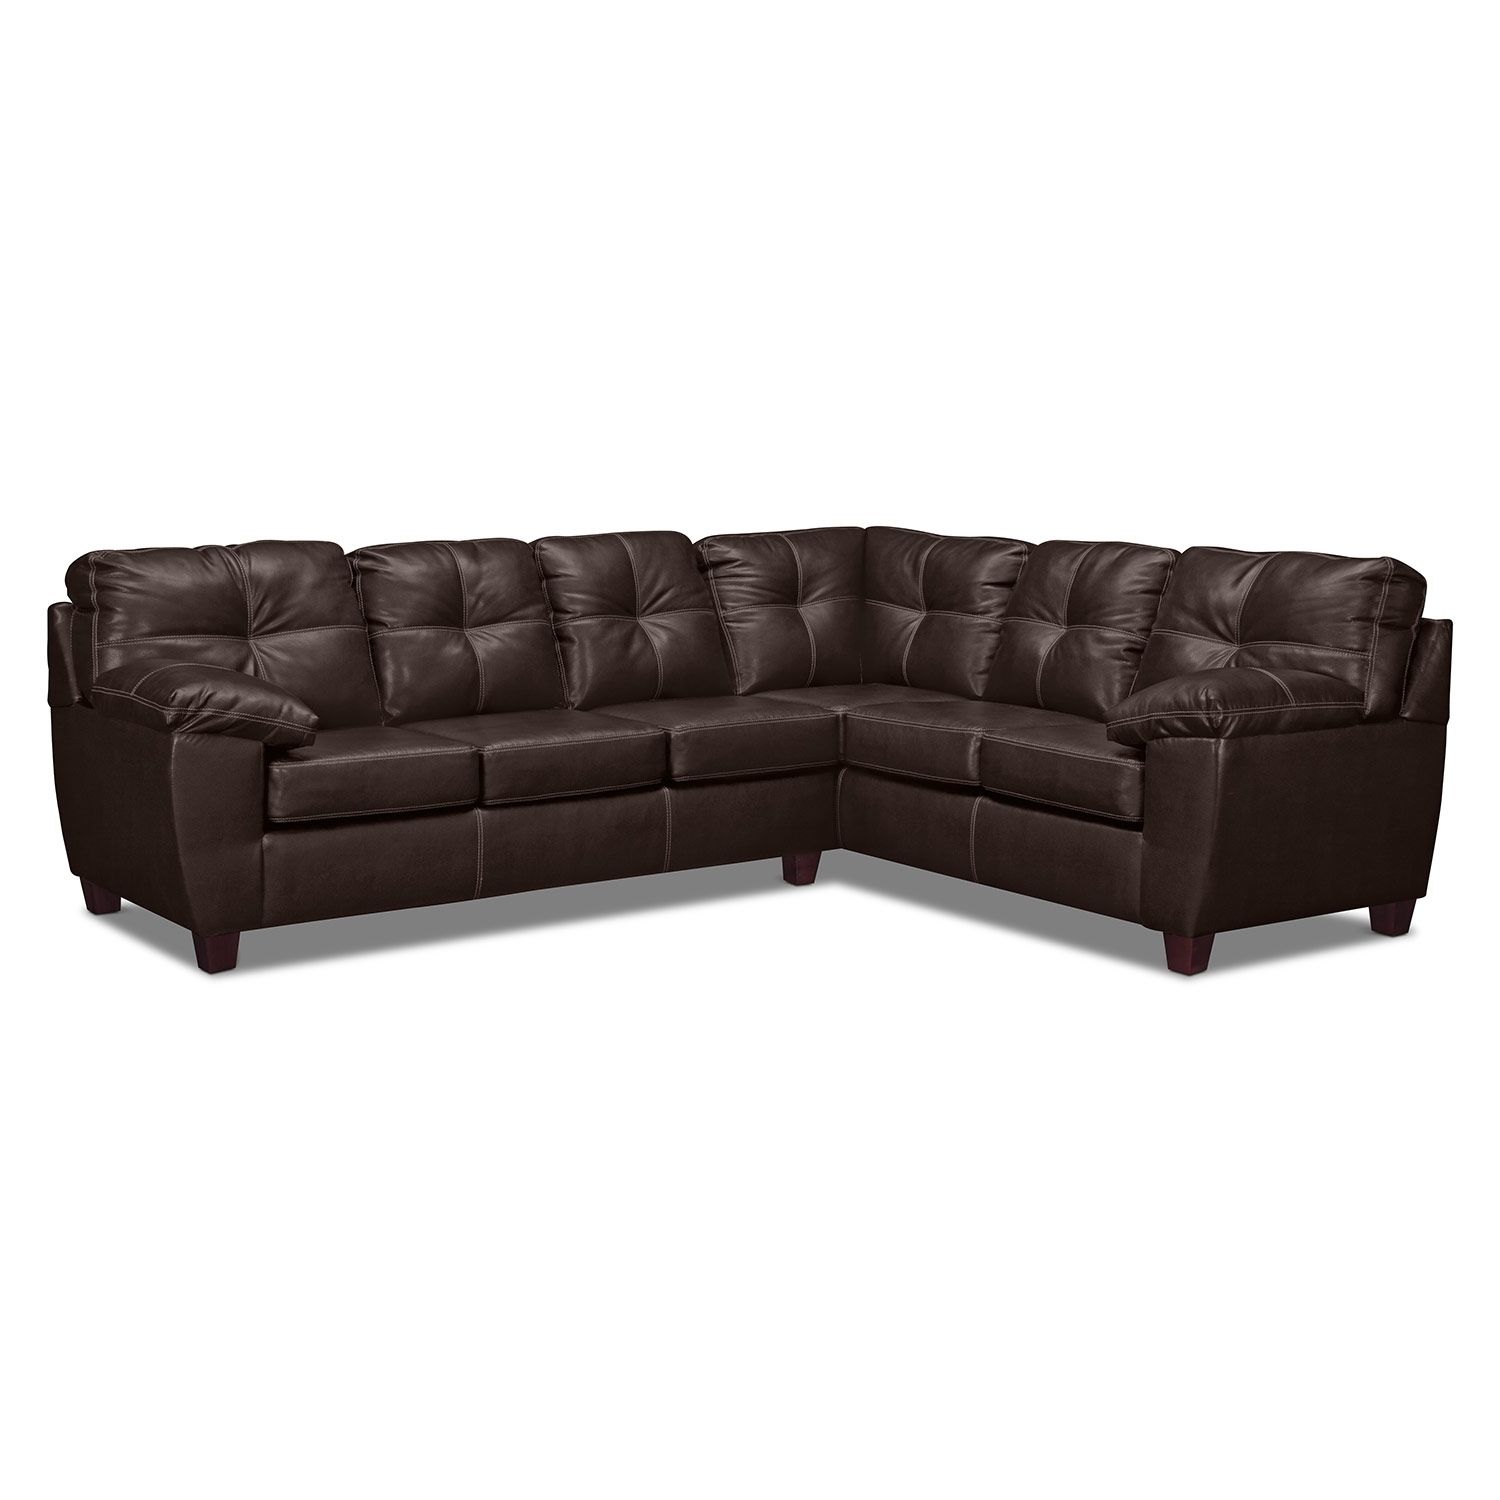 Modern Value City Sectional Sofa Factory Outlet Home Furniture Sofas Within Value City Sectional Sofas (Photo 6 of 10)